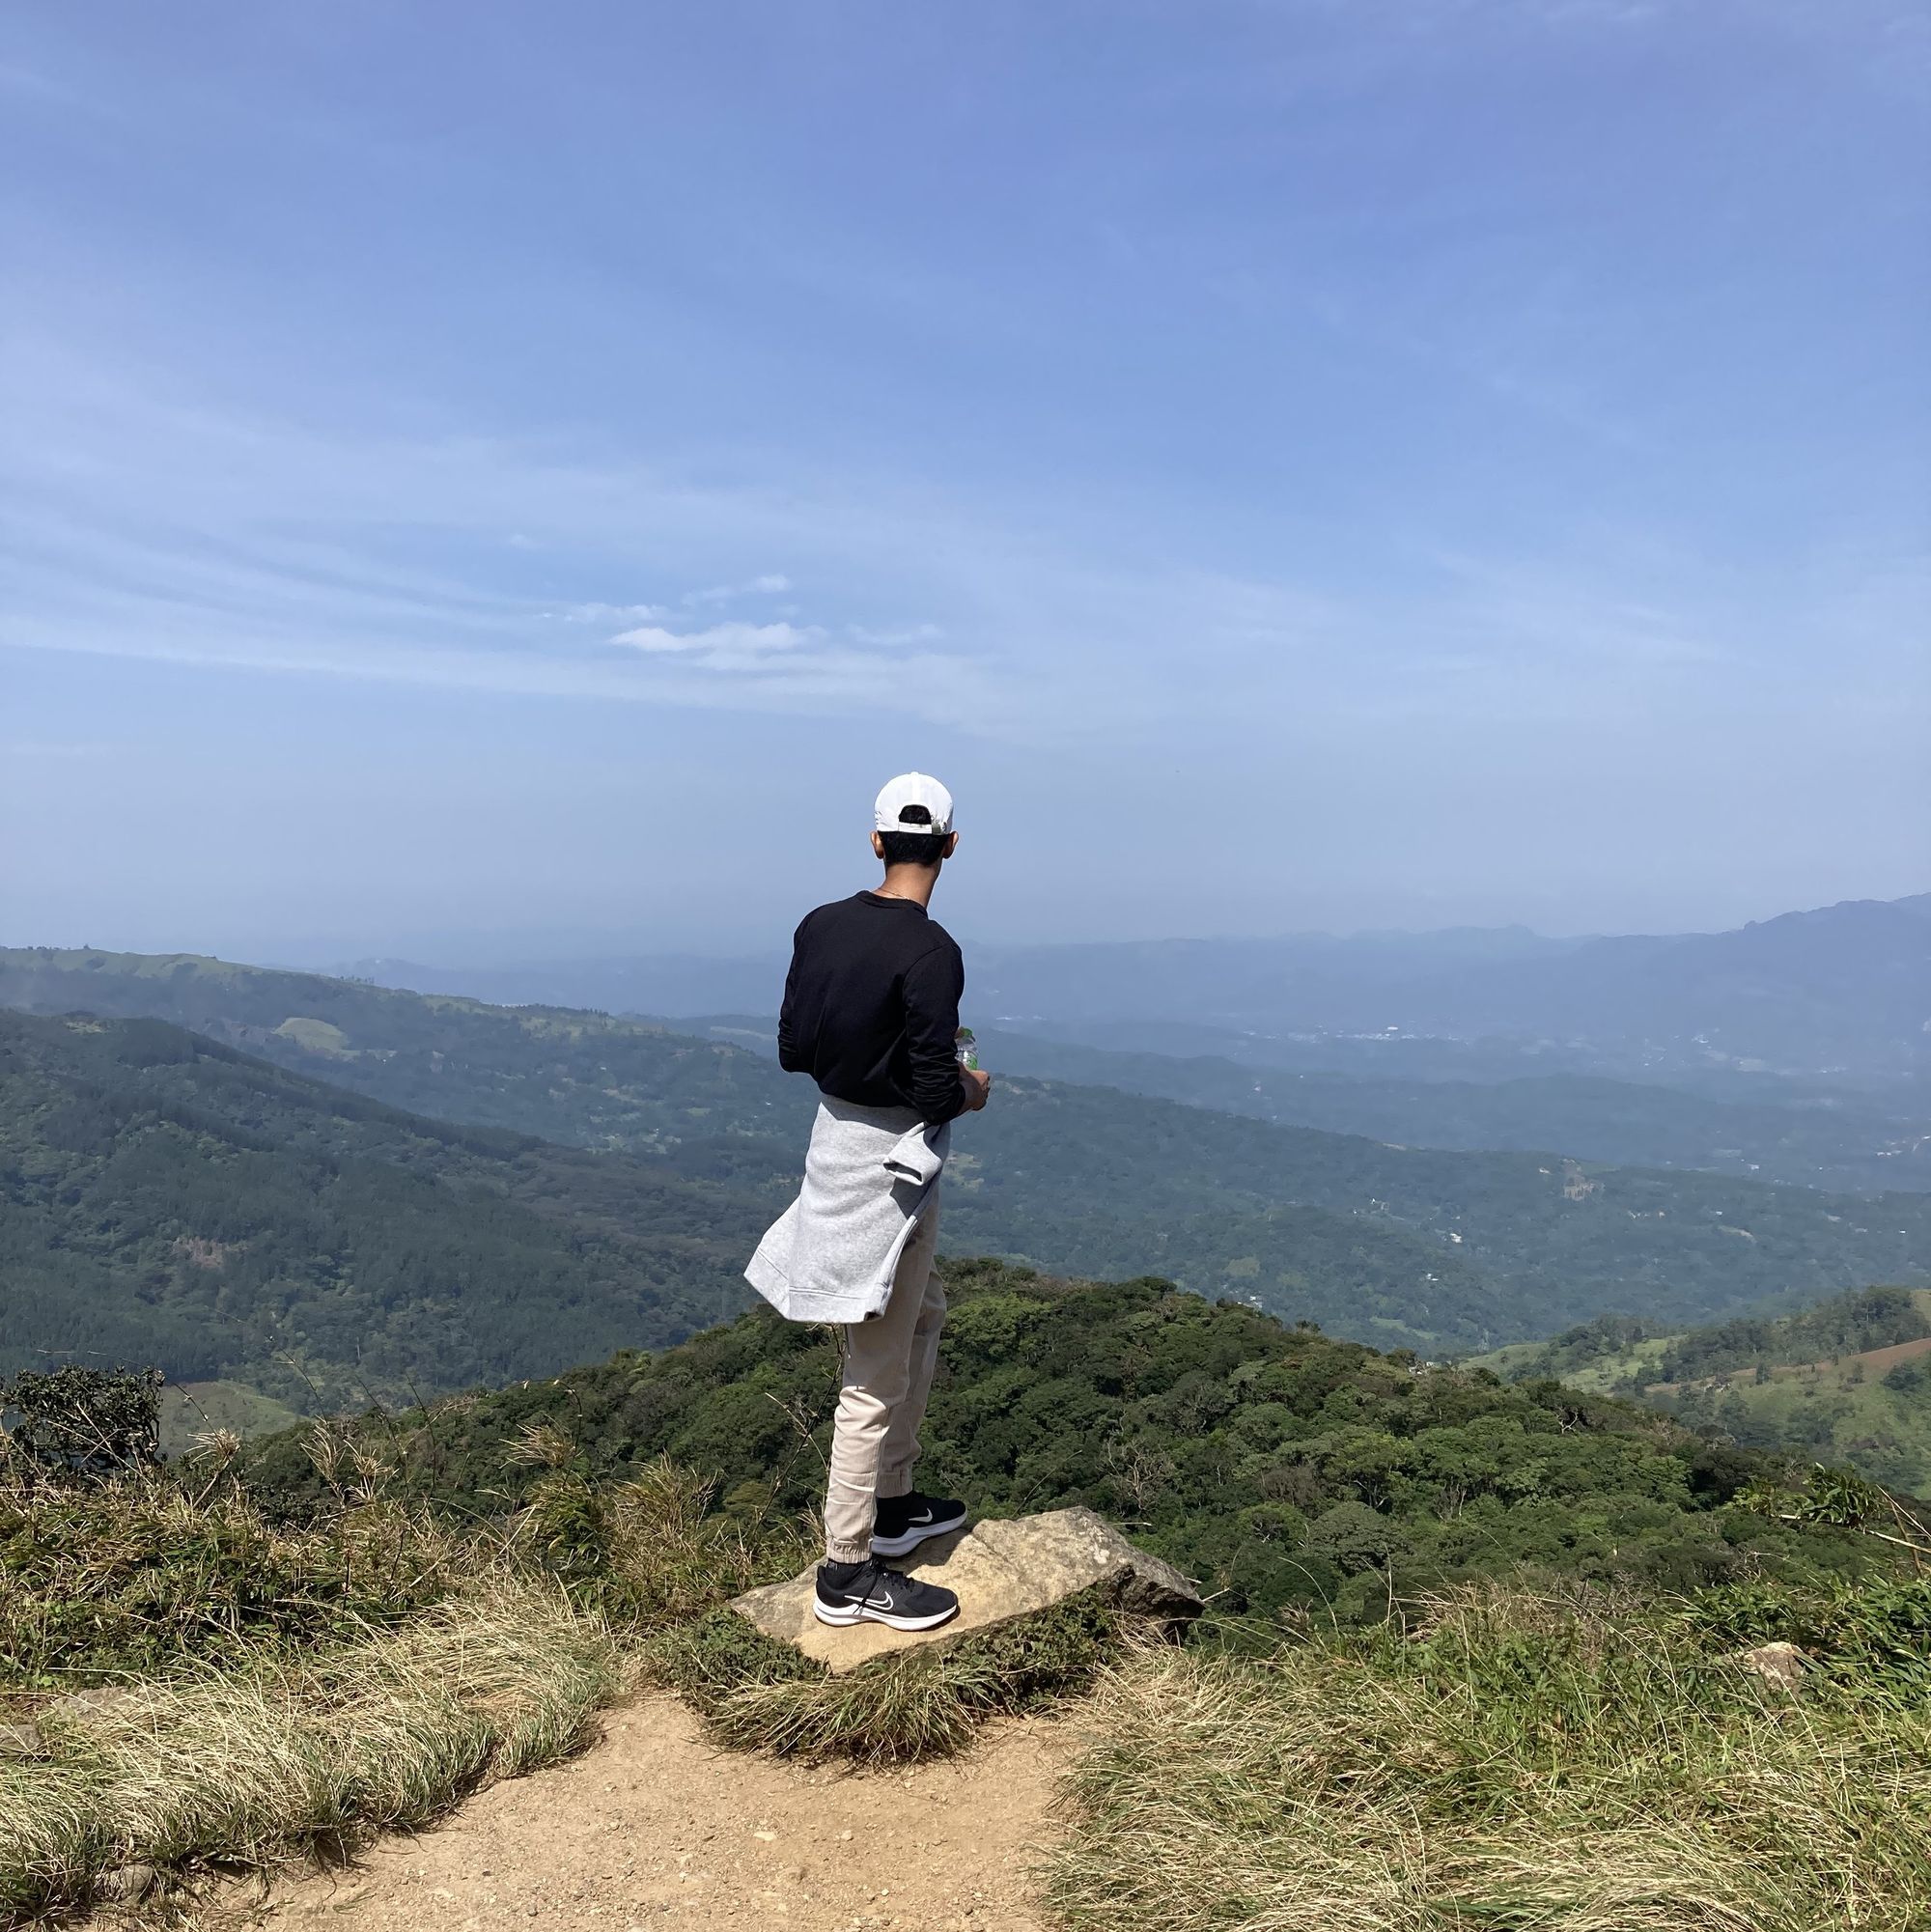 A boy admiring the view in Riverston Peak in Matale, Sri Lanka, during a hike